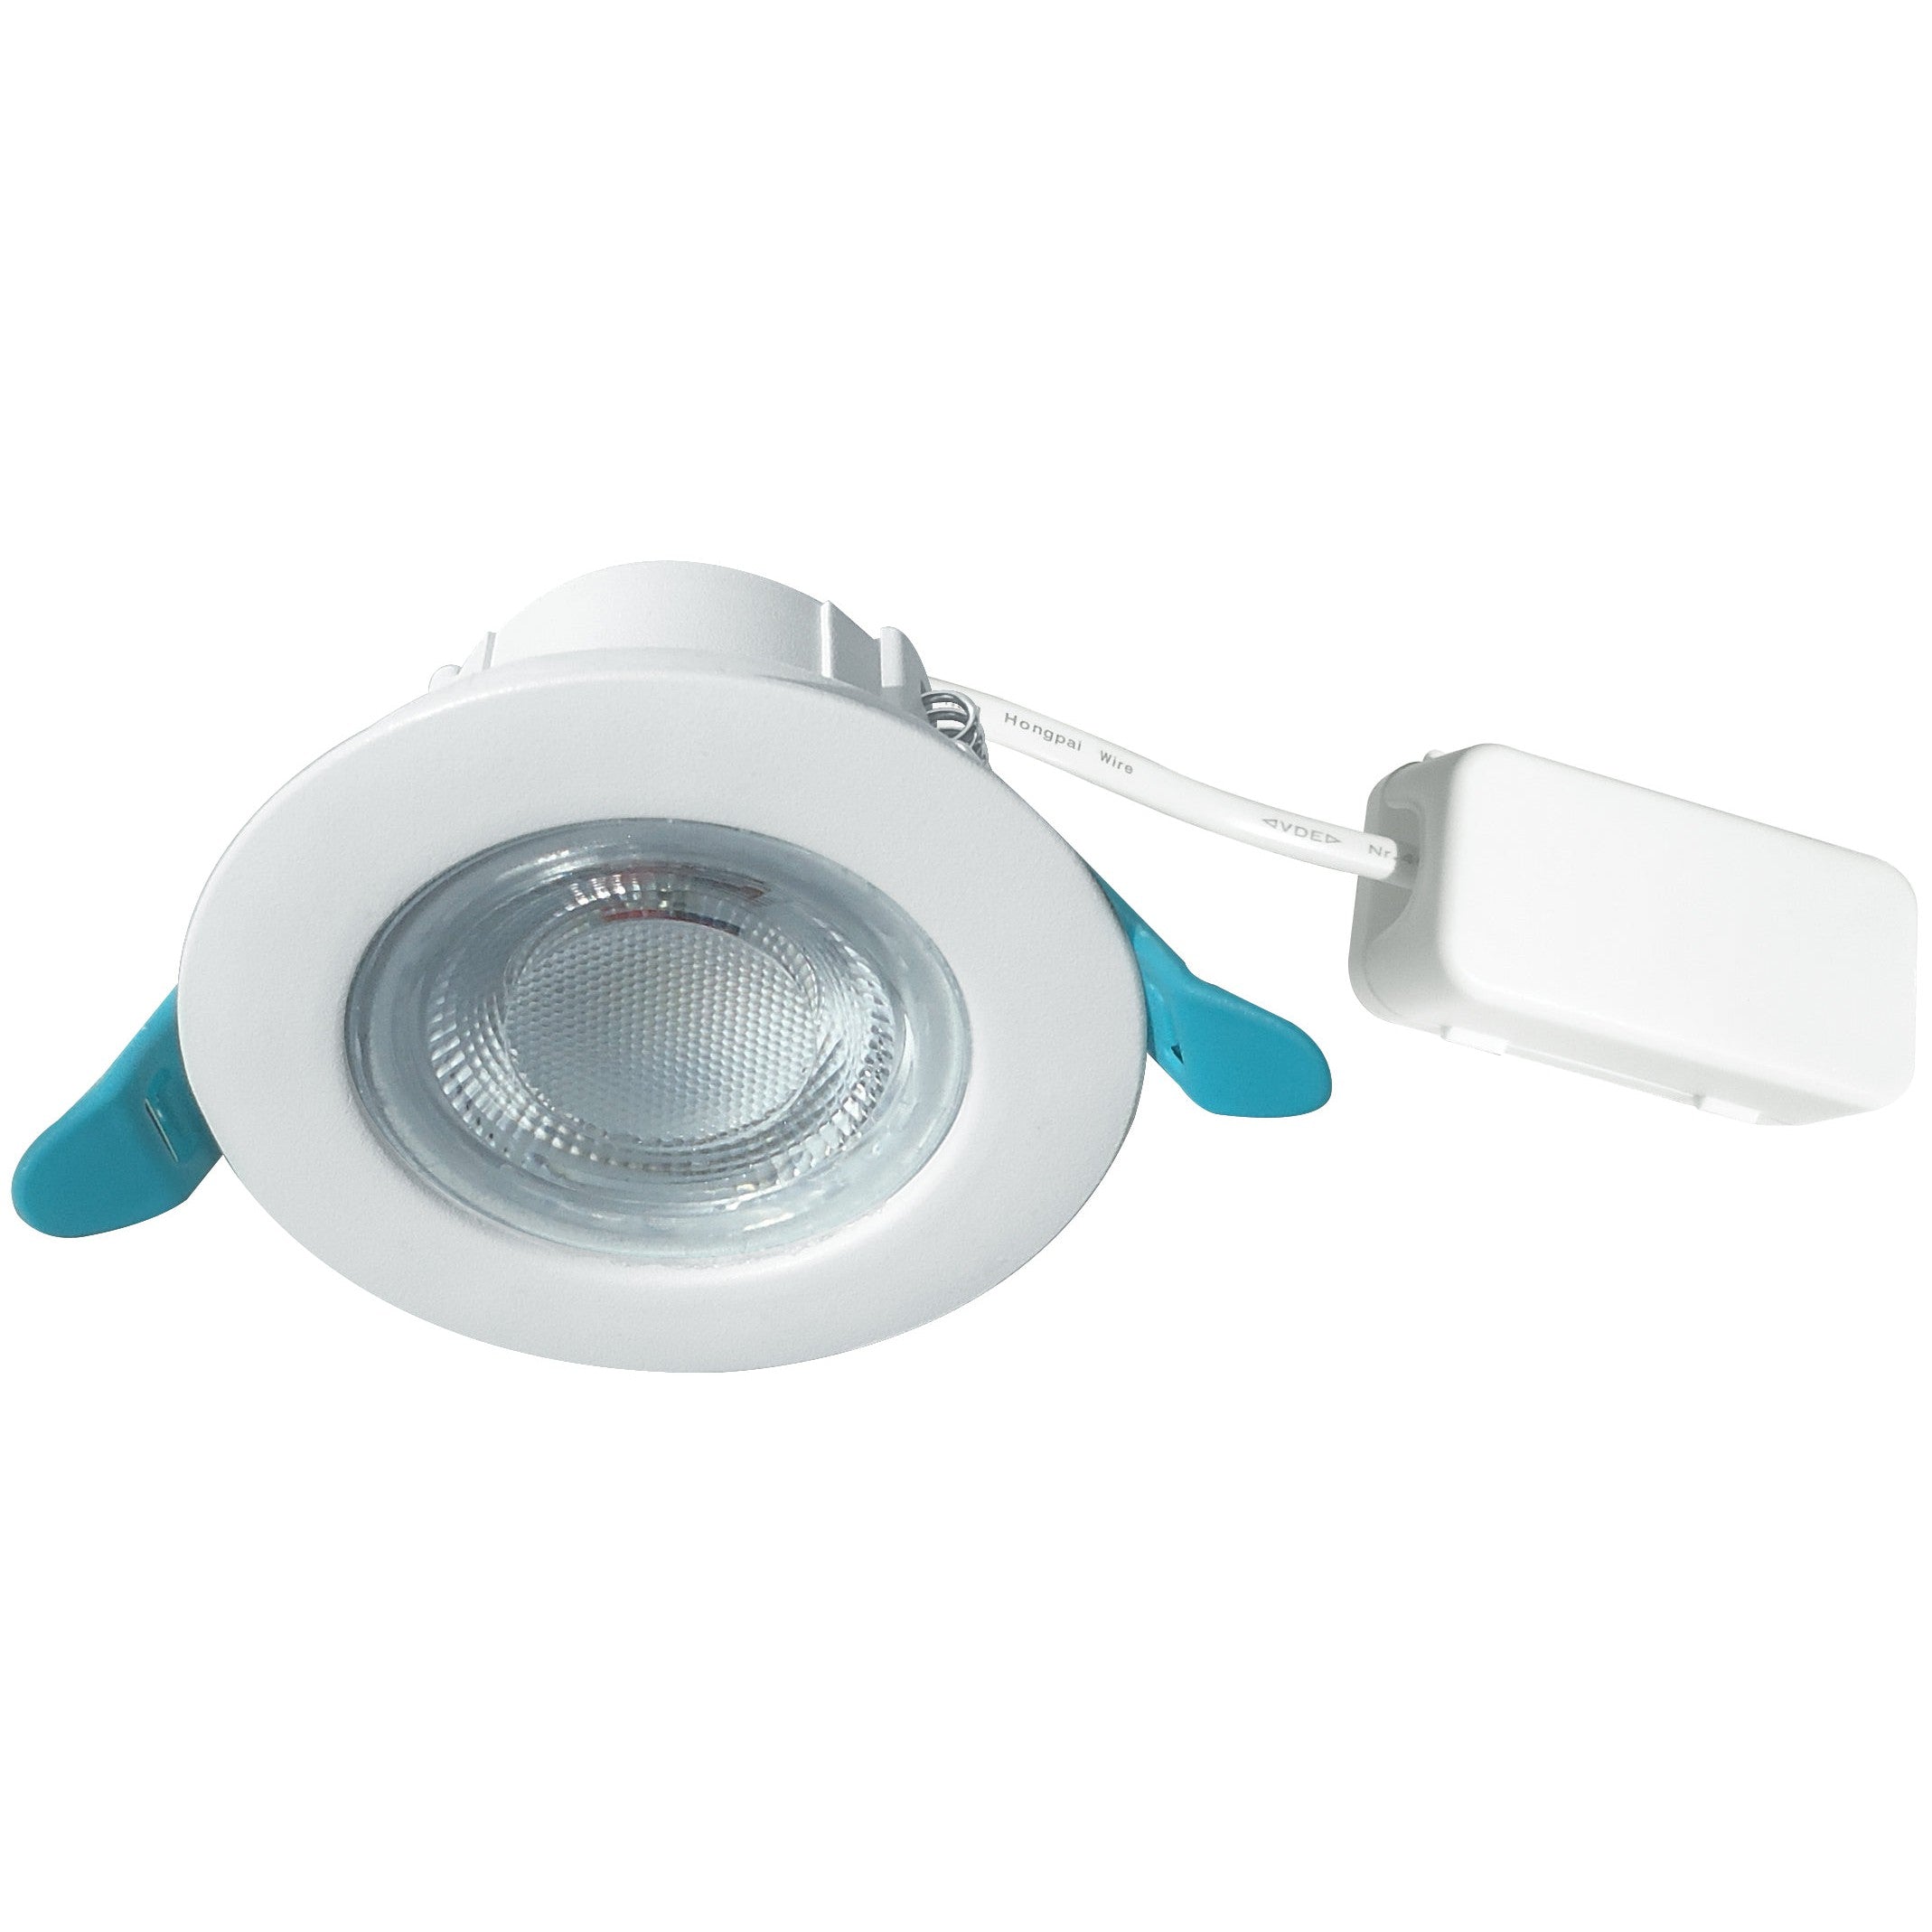 Eterna FIRELEDPCS Colour Selectable Fire Rated LED Downlight